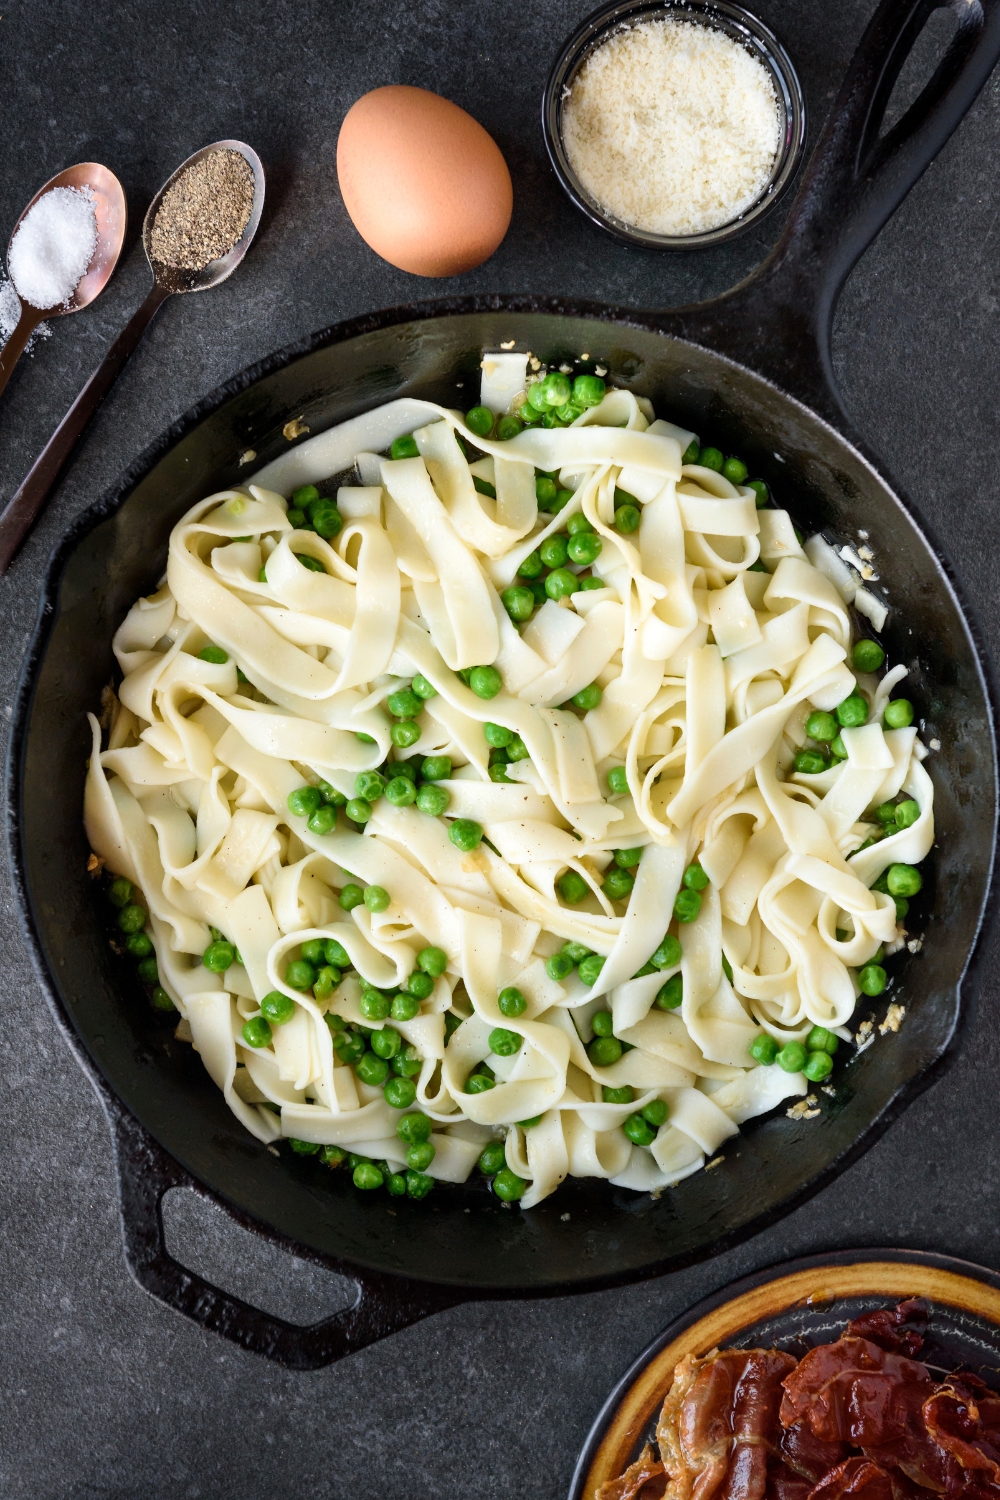 A cast iron skillet filled with cooked pasta mixed with peas.